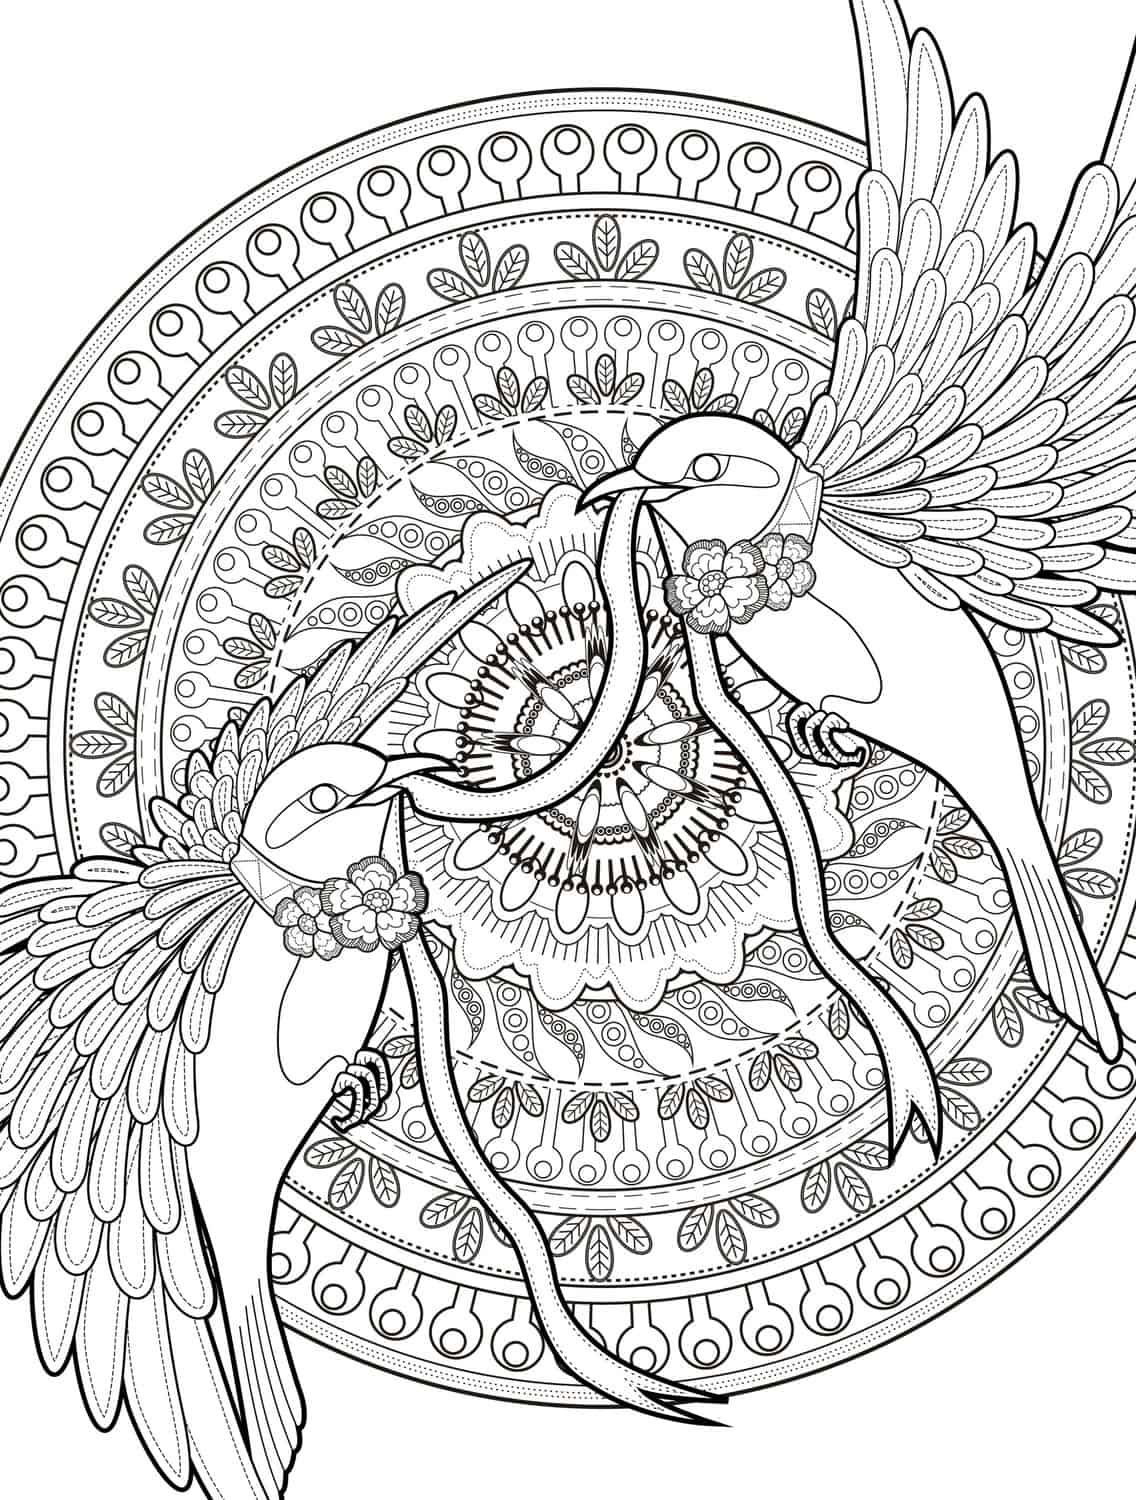 Adult Coloring Page 77